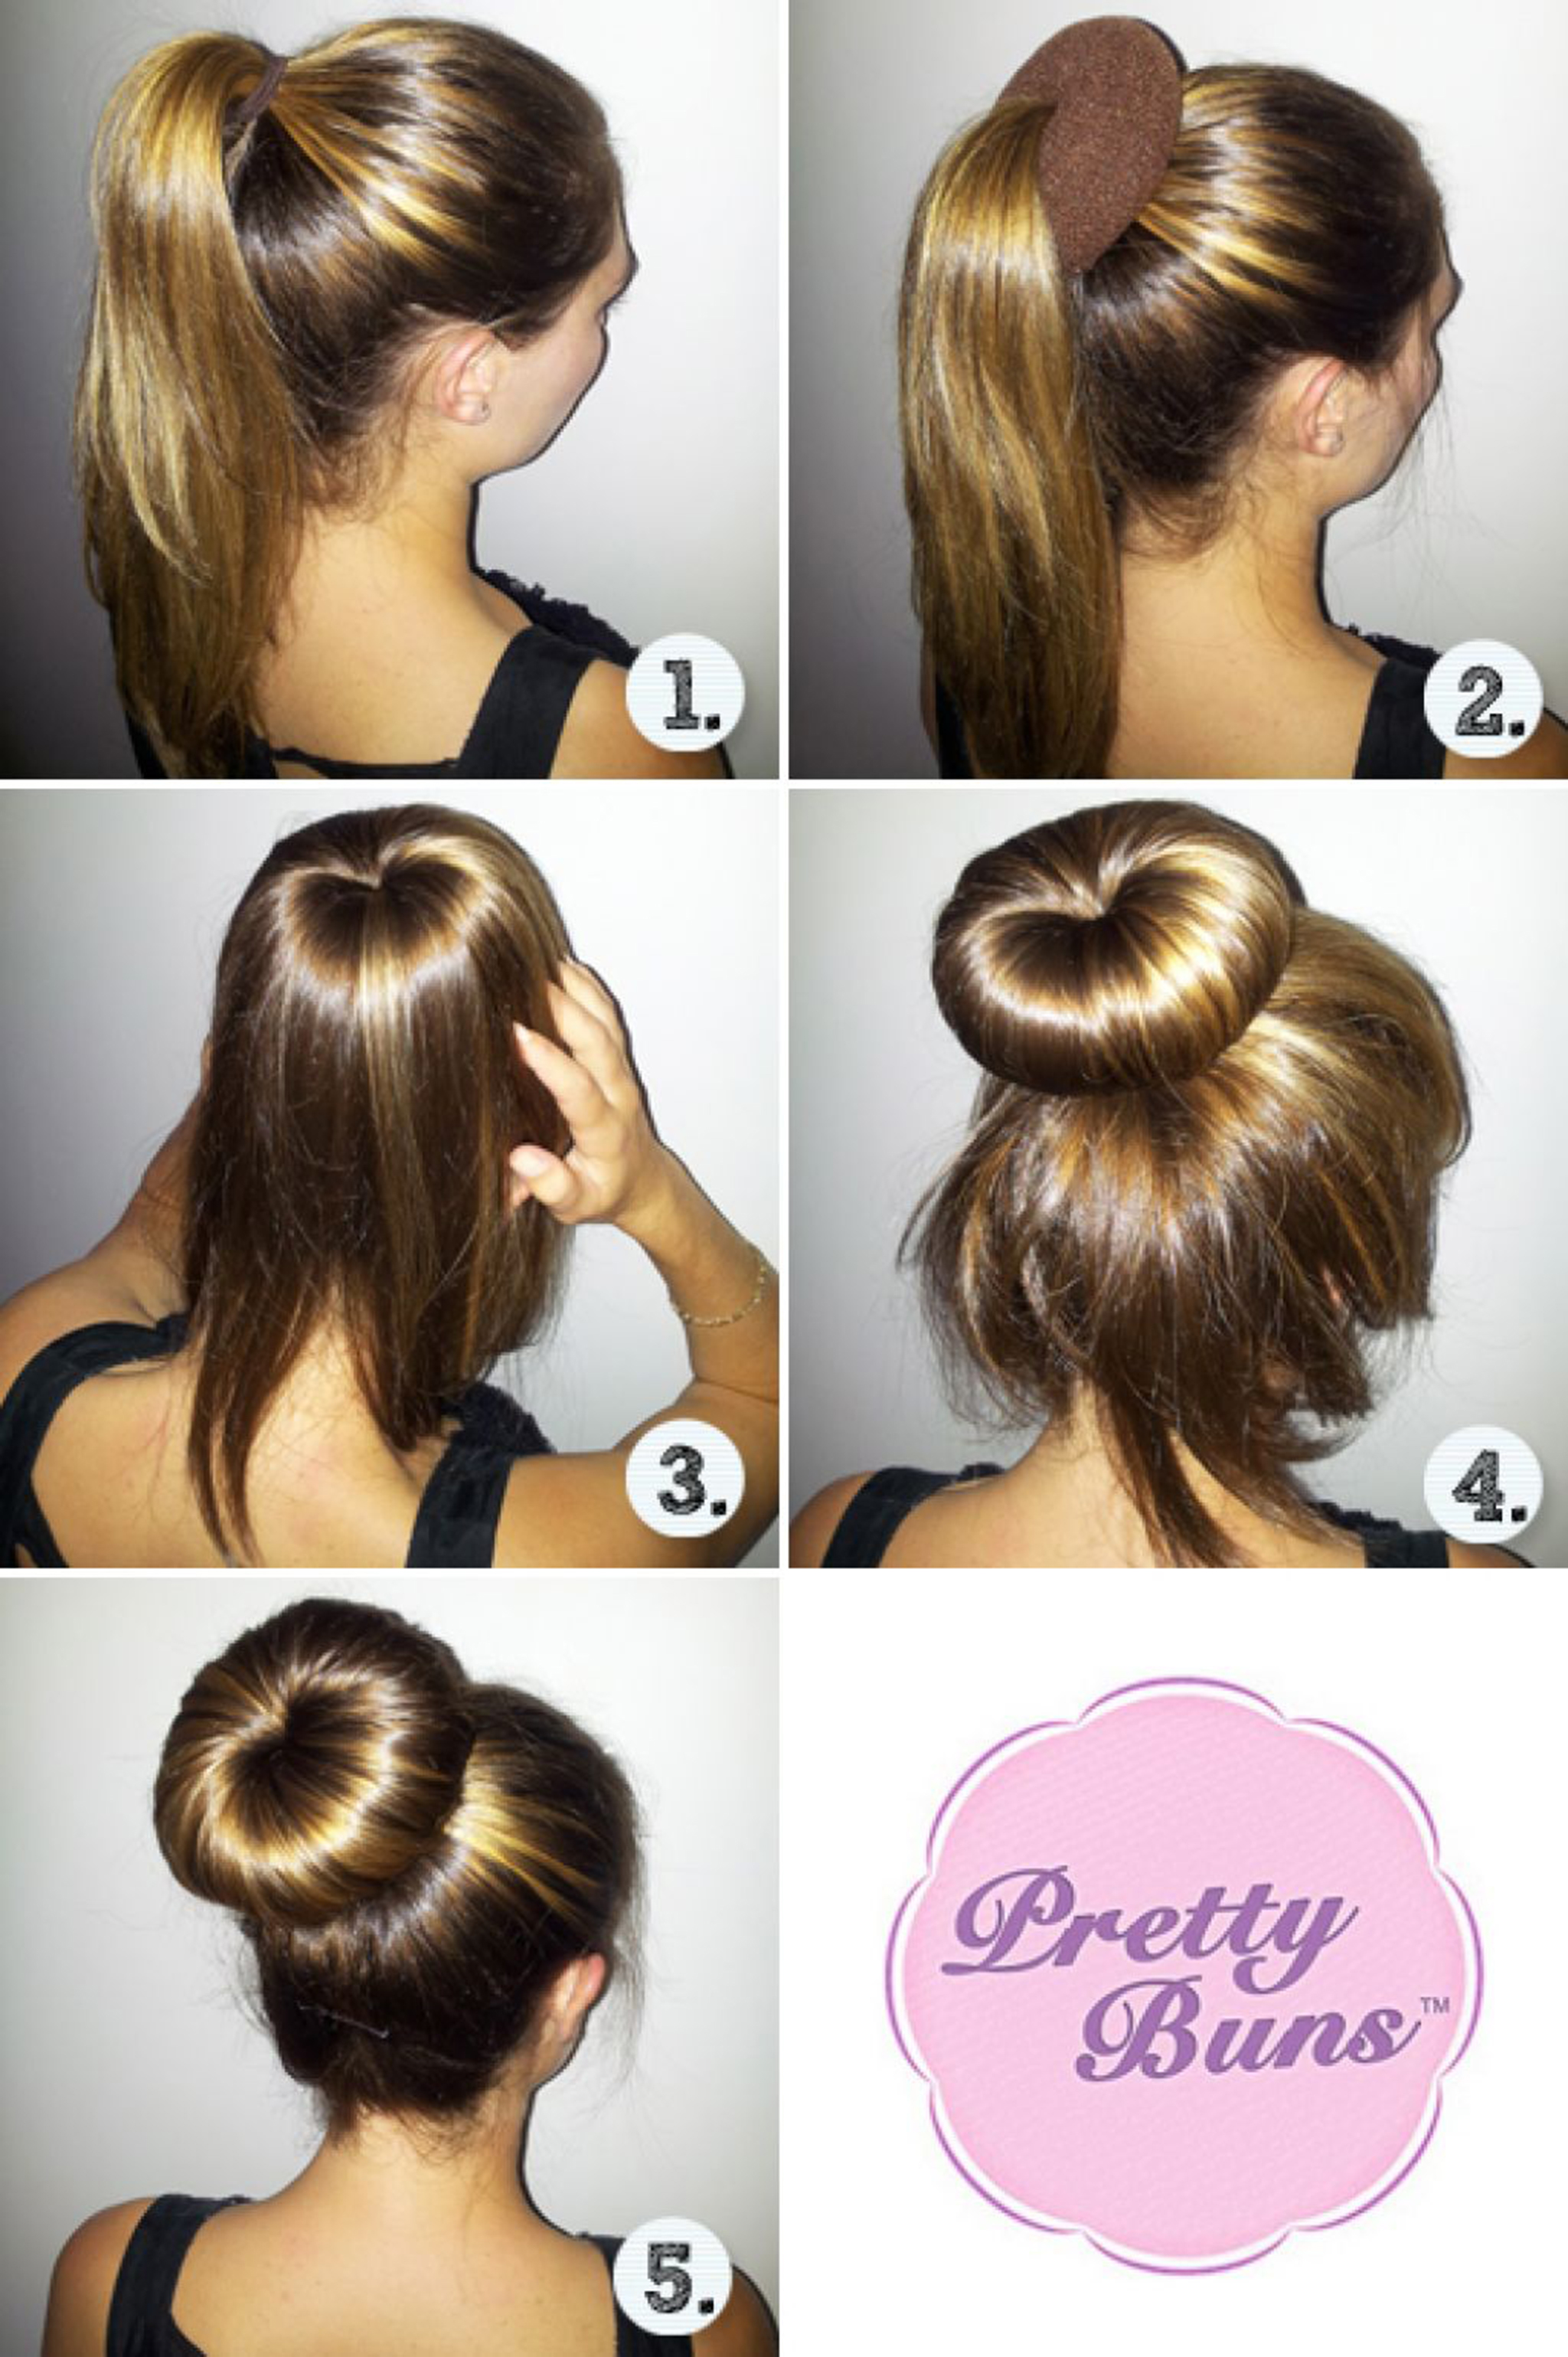 10 Cute Messy Hair Bun Tutorials To Give You Glamorous Look In 10 Minutes